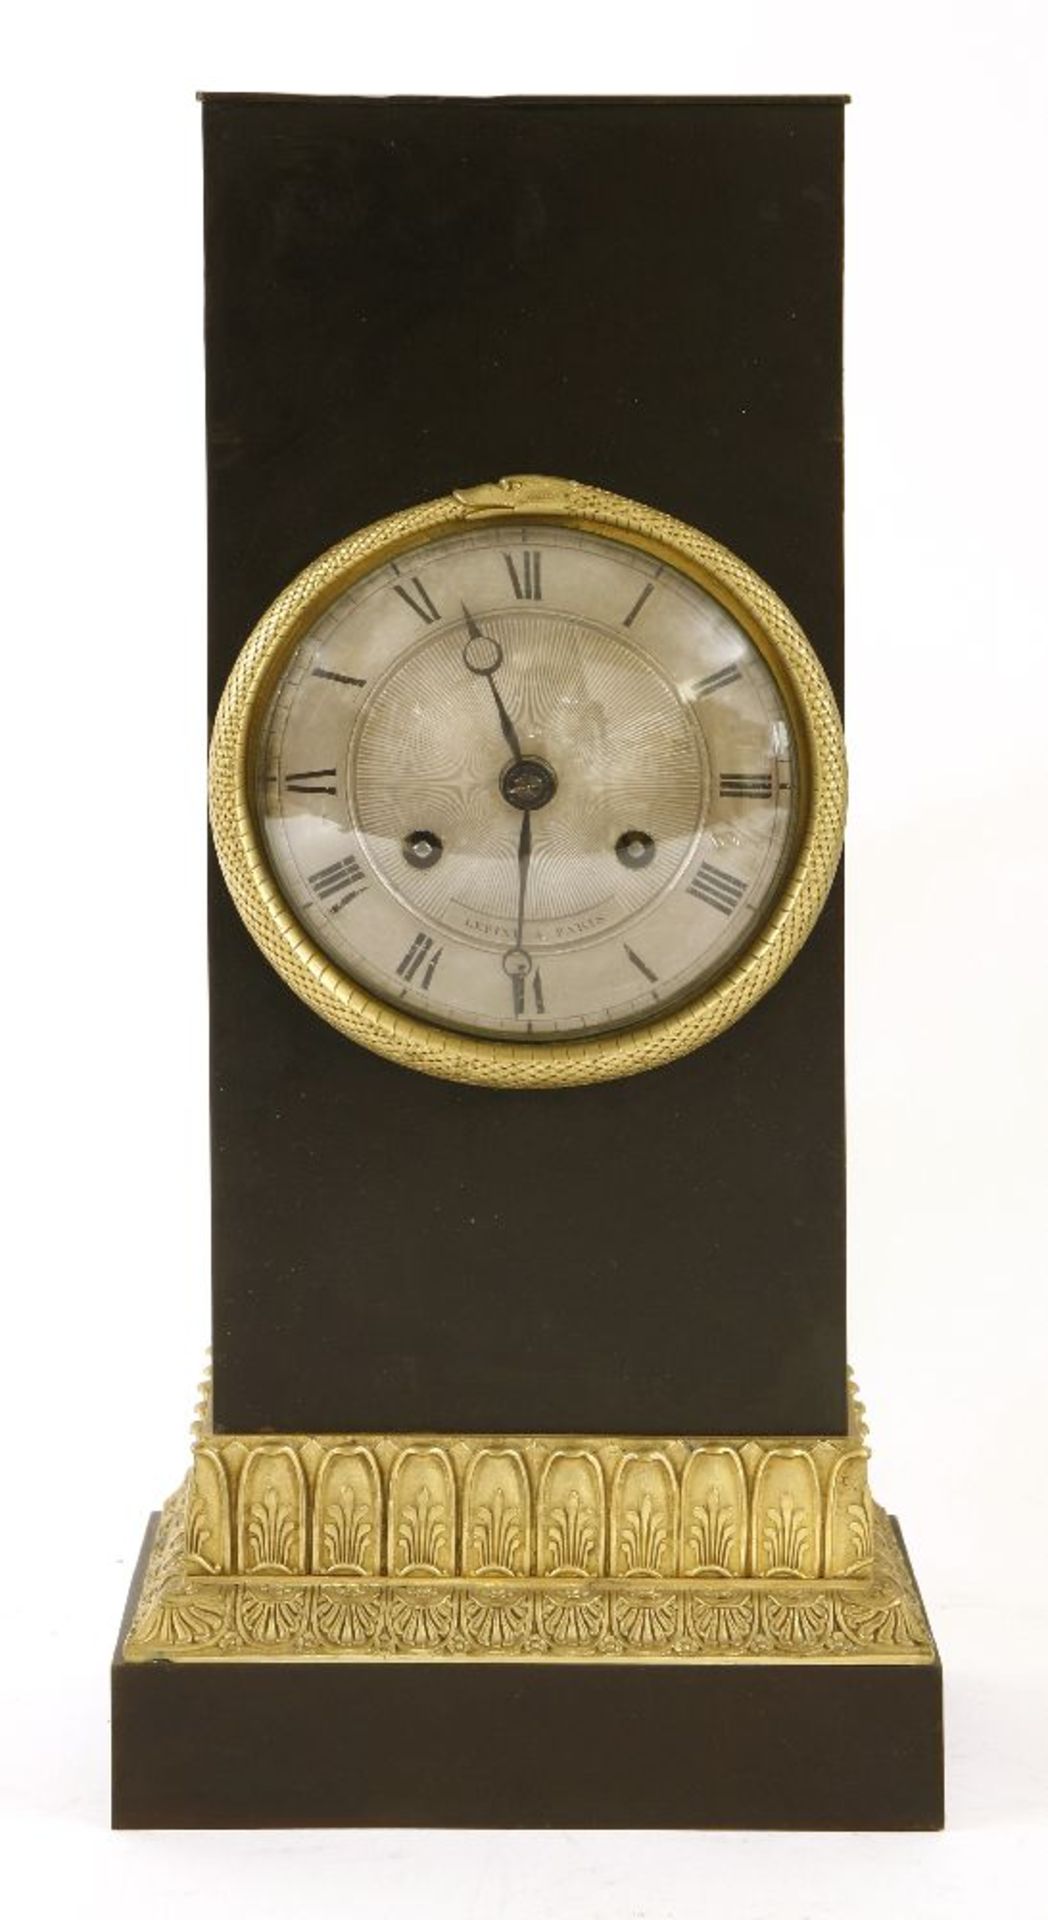 An Empire-style bracket clock,19th century, the silvered dial signed 'Lepine a Paris' with an ormolu